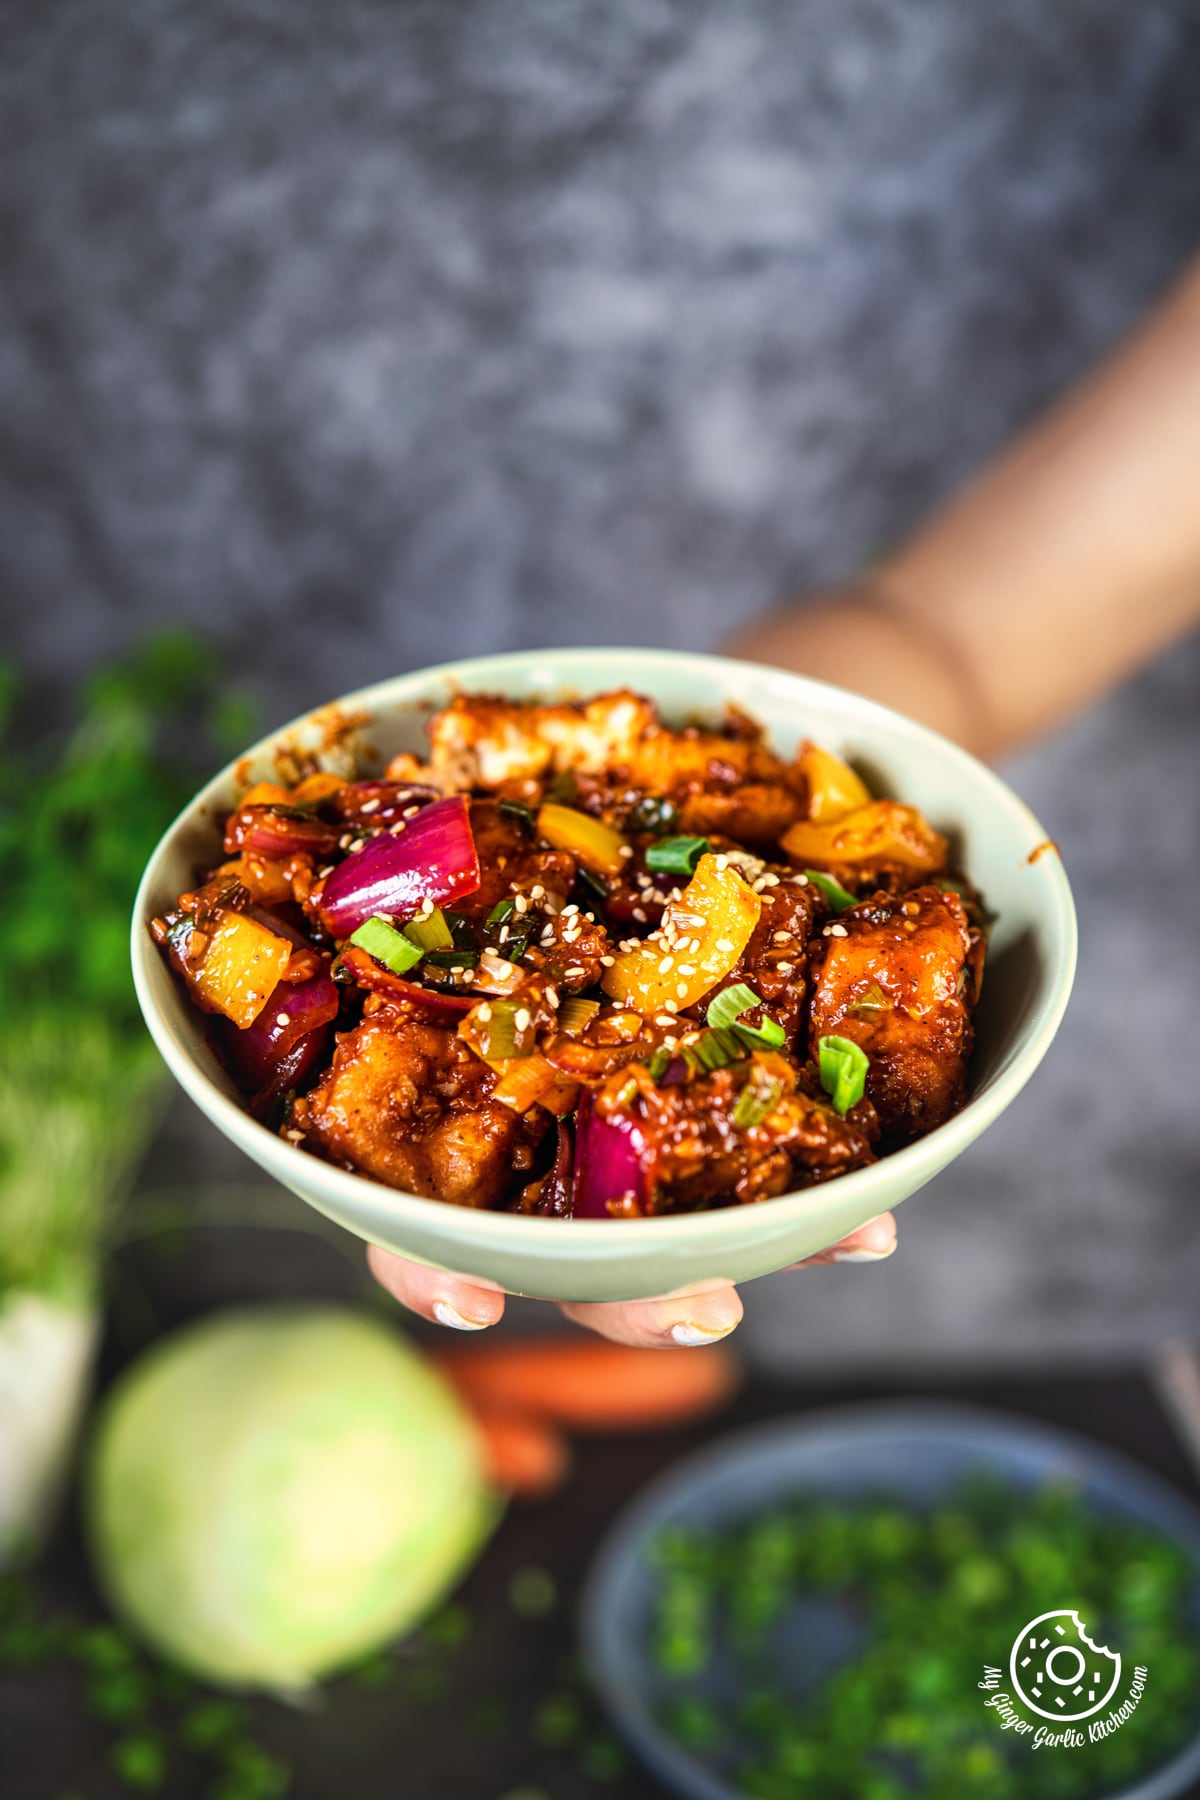 a hand holding a bowl of fried paneer manchurian topped with sesame seeds and spring greens